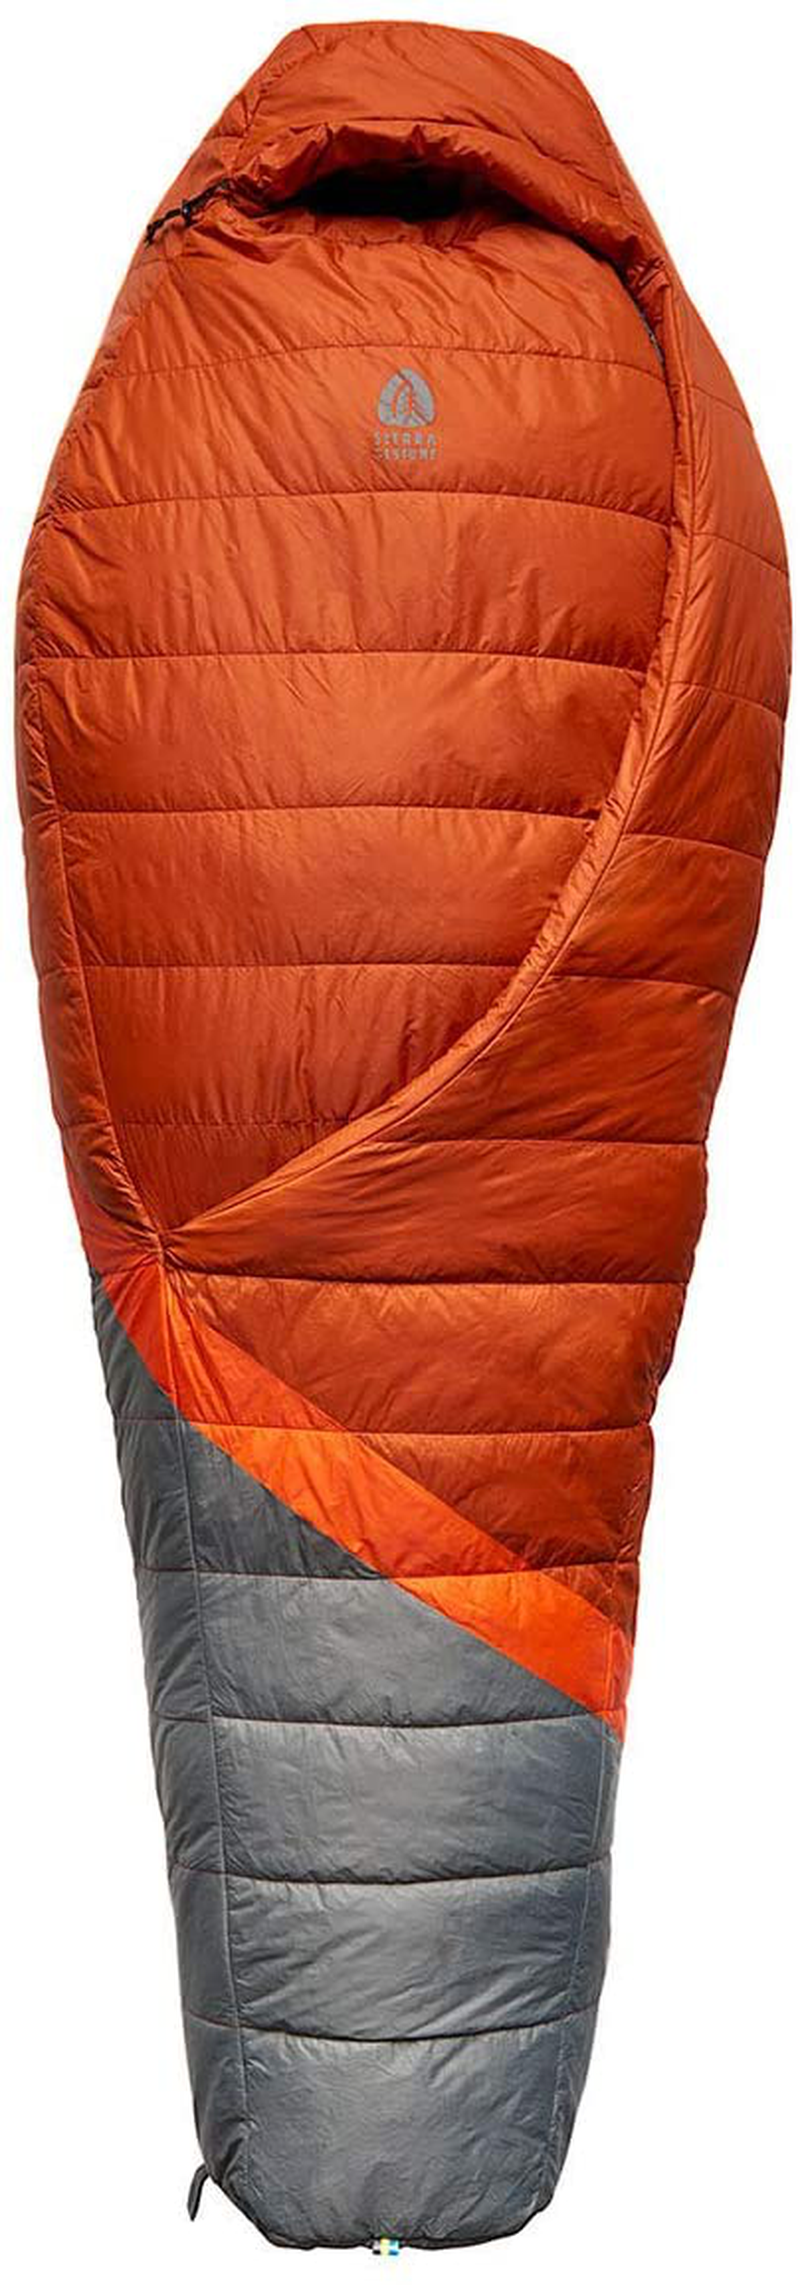 Sierra Designs Night Cap 35 Degree Sleeping Bags - Recycled Synthetic, Zipperless, Mummy Style Camping & Backpacking Sleeping Bags for Men & Women Sporting Goods > Outdoor Recreation > Camping & Hiking > Sleeping Bags Sierra Designs Regular  